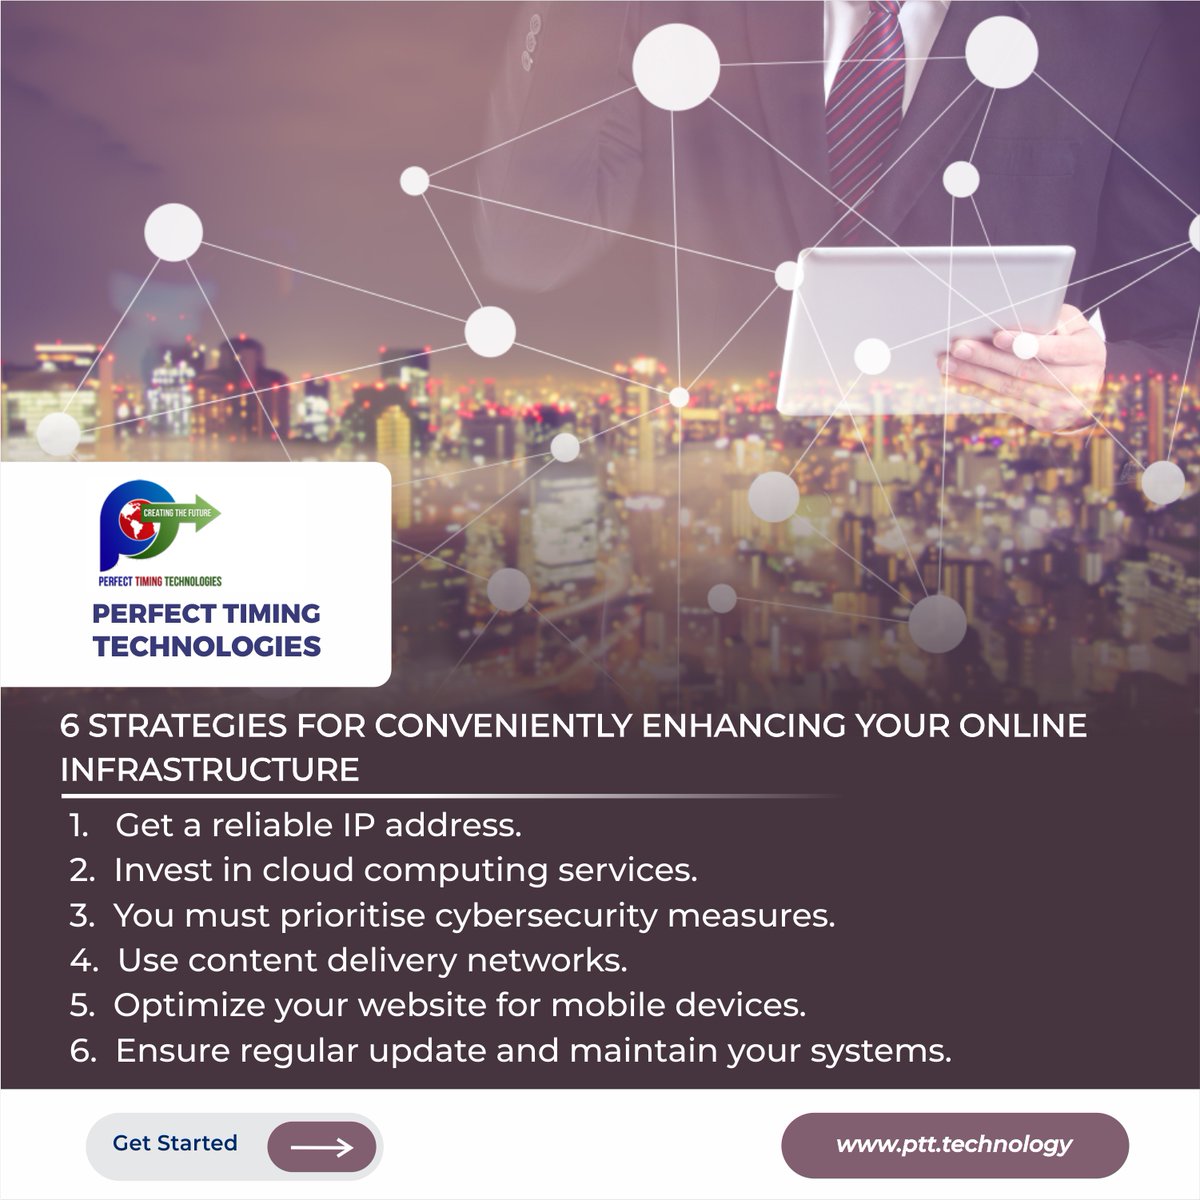 6 Strategies for Conveniently Enhancing Your Online Infrastructure

Read here: entrepreneurshipinabox.com/43665/6-strate…

#PerfectTimingTechnology #PerfectTimingHolding #OnlineInfrastructure #TechStrategies #TechEnhancement #Entrepreneurship #DigitalInfrastructure #TechDevelopment #BusinessGrowth